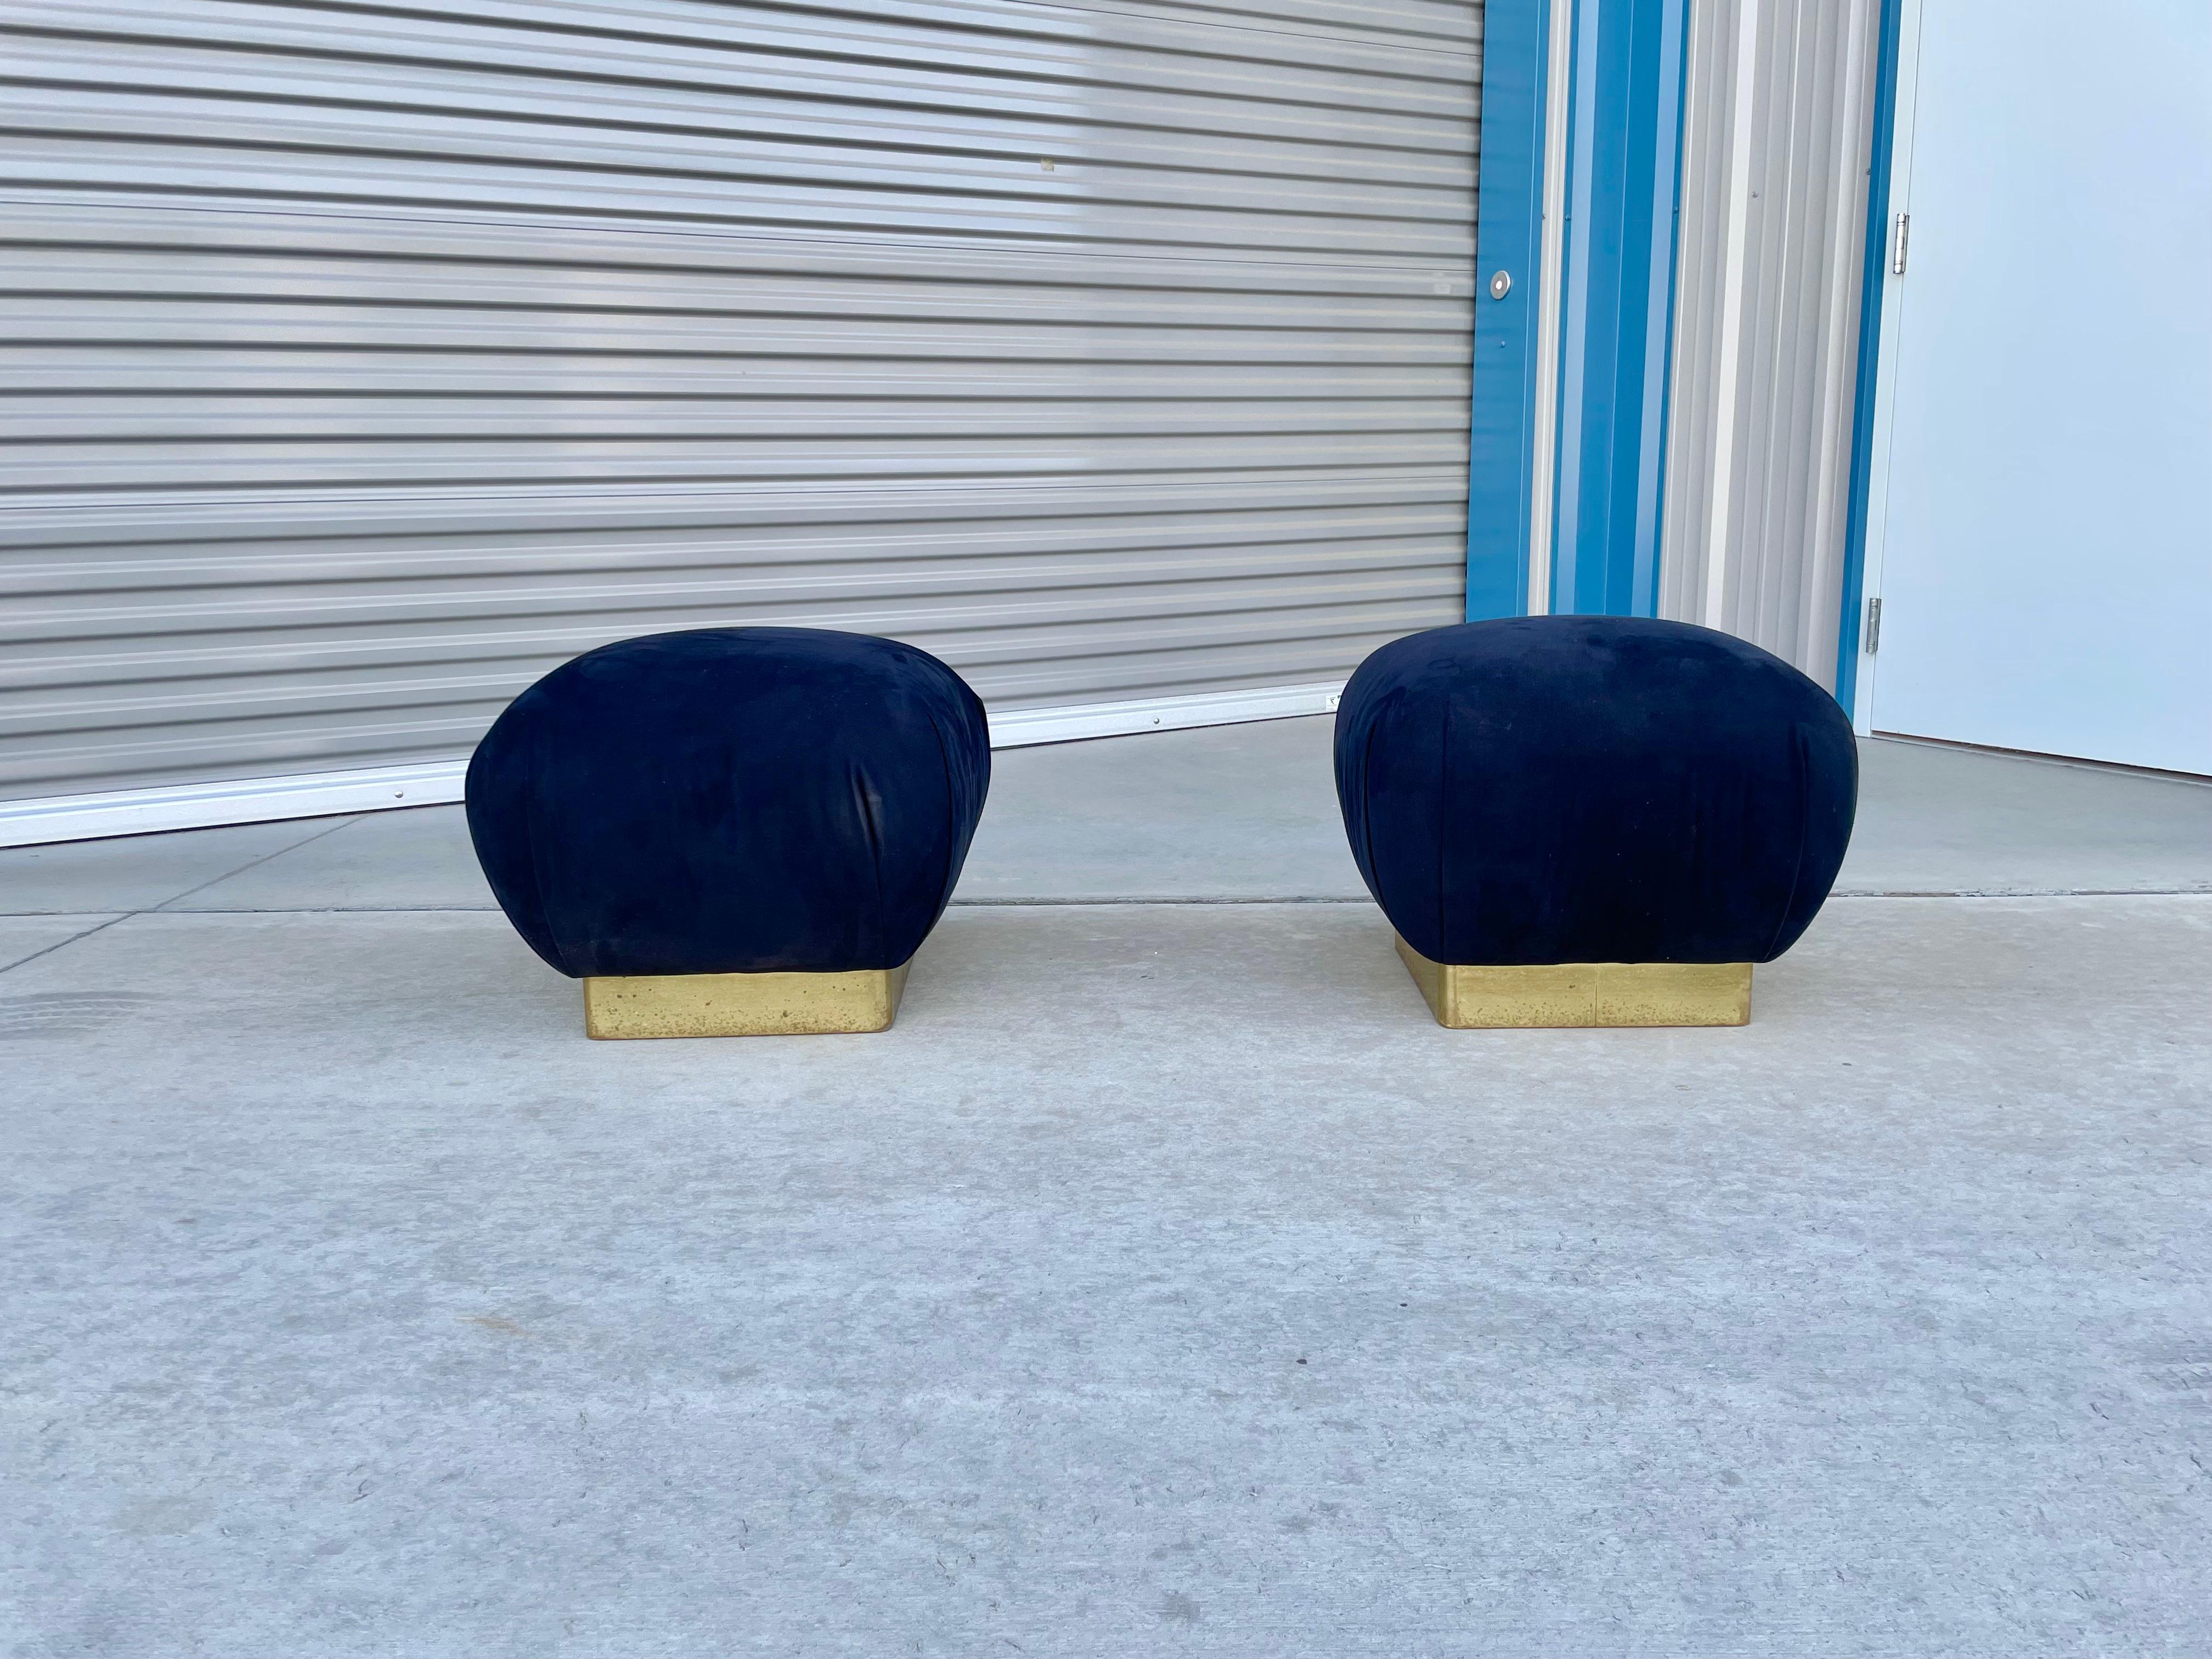 Wonderful pair of vintage brass poufs/ottomans designed by Marge Carson in the United States, circa 1970s. Each pouf features a brass base, and each cushion seems to have the design of a delicious souffle that is about to burst.